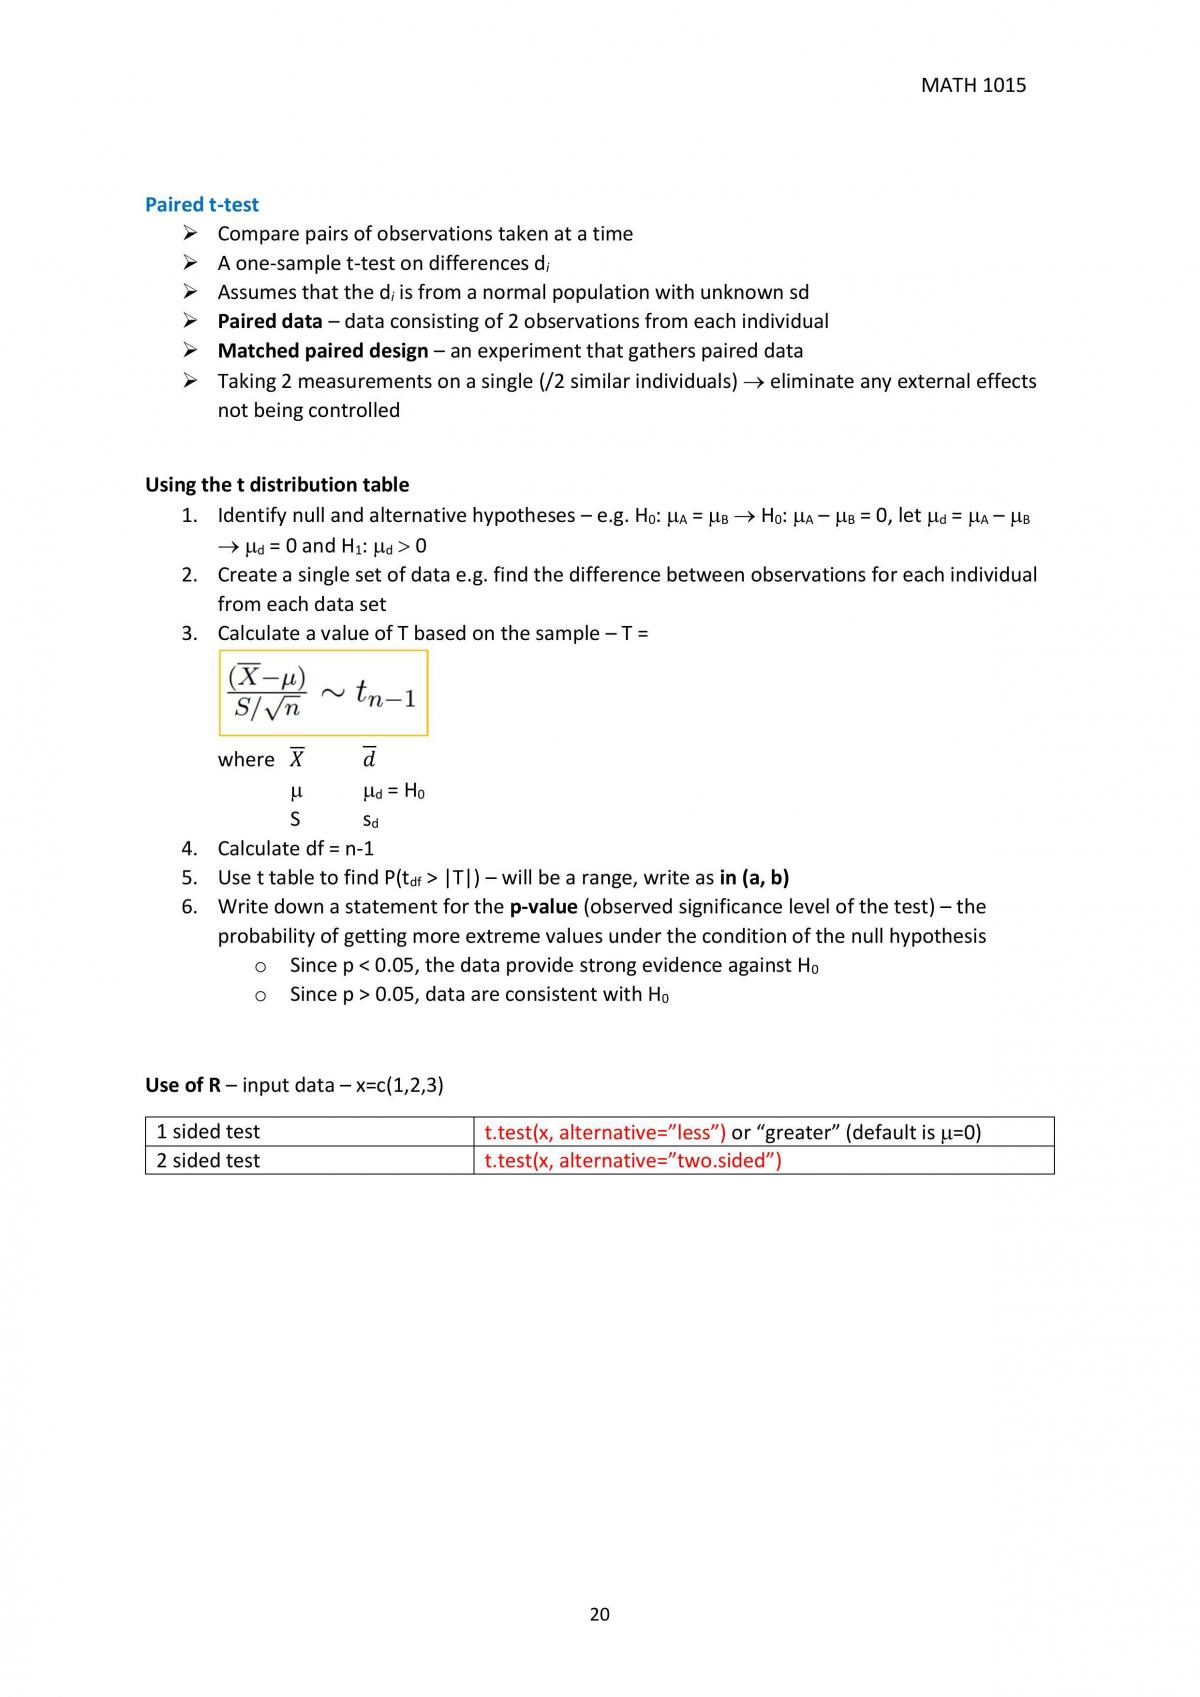 MATH1015 Notes - Page 20